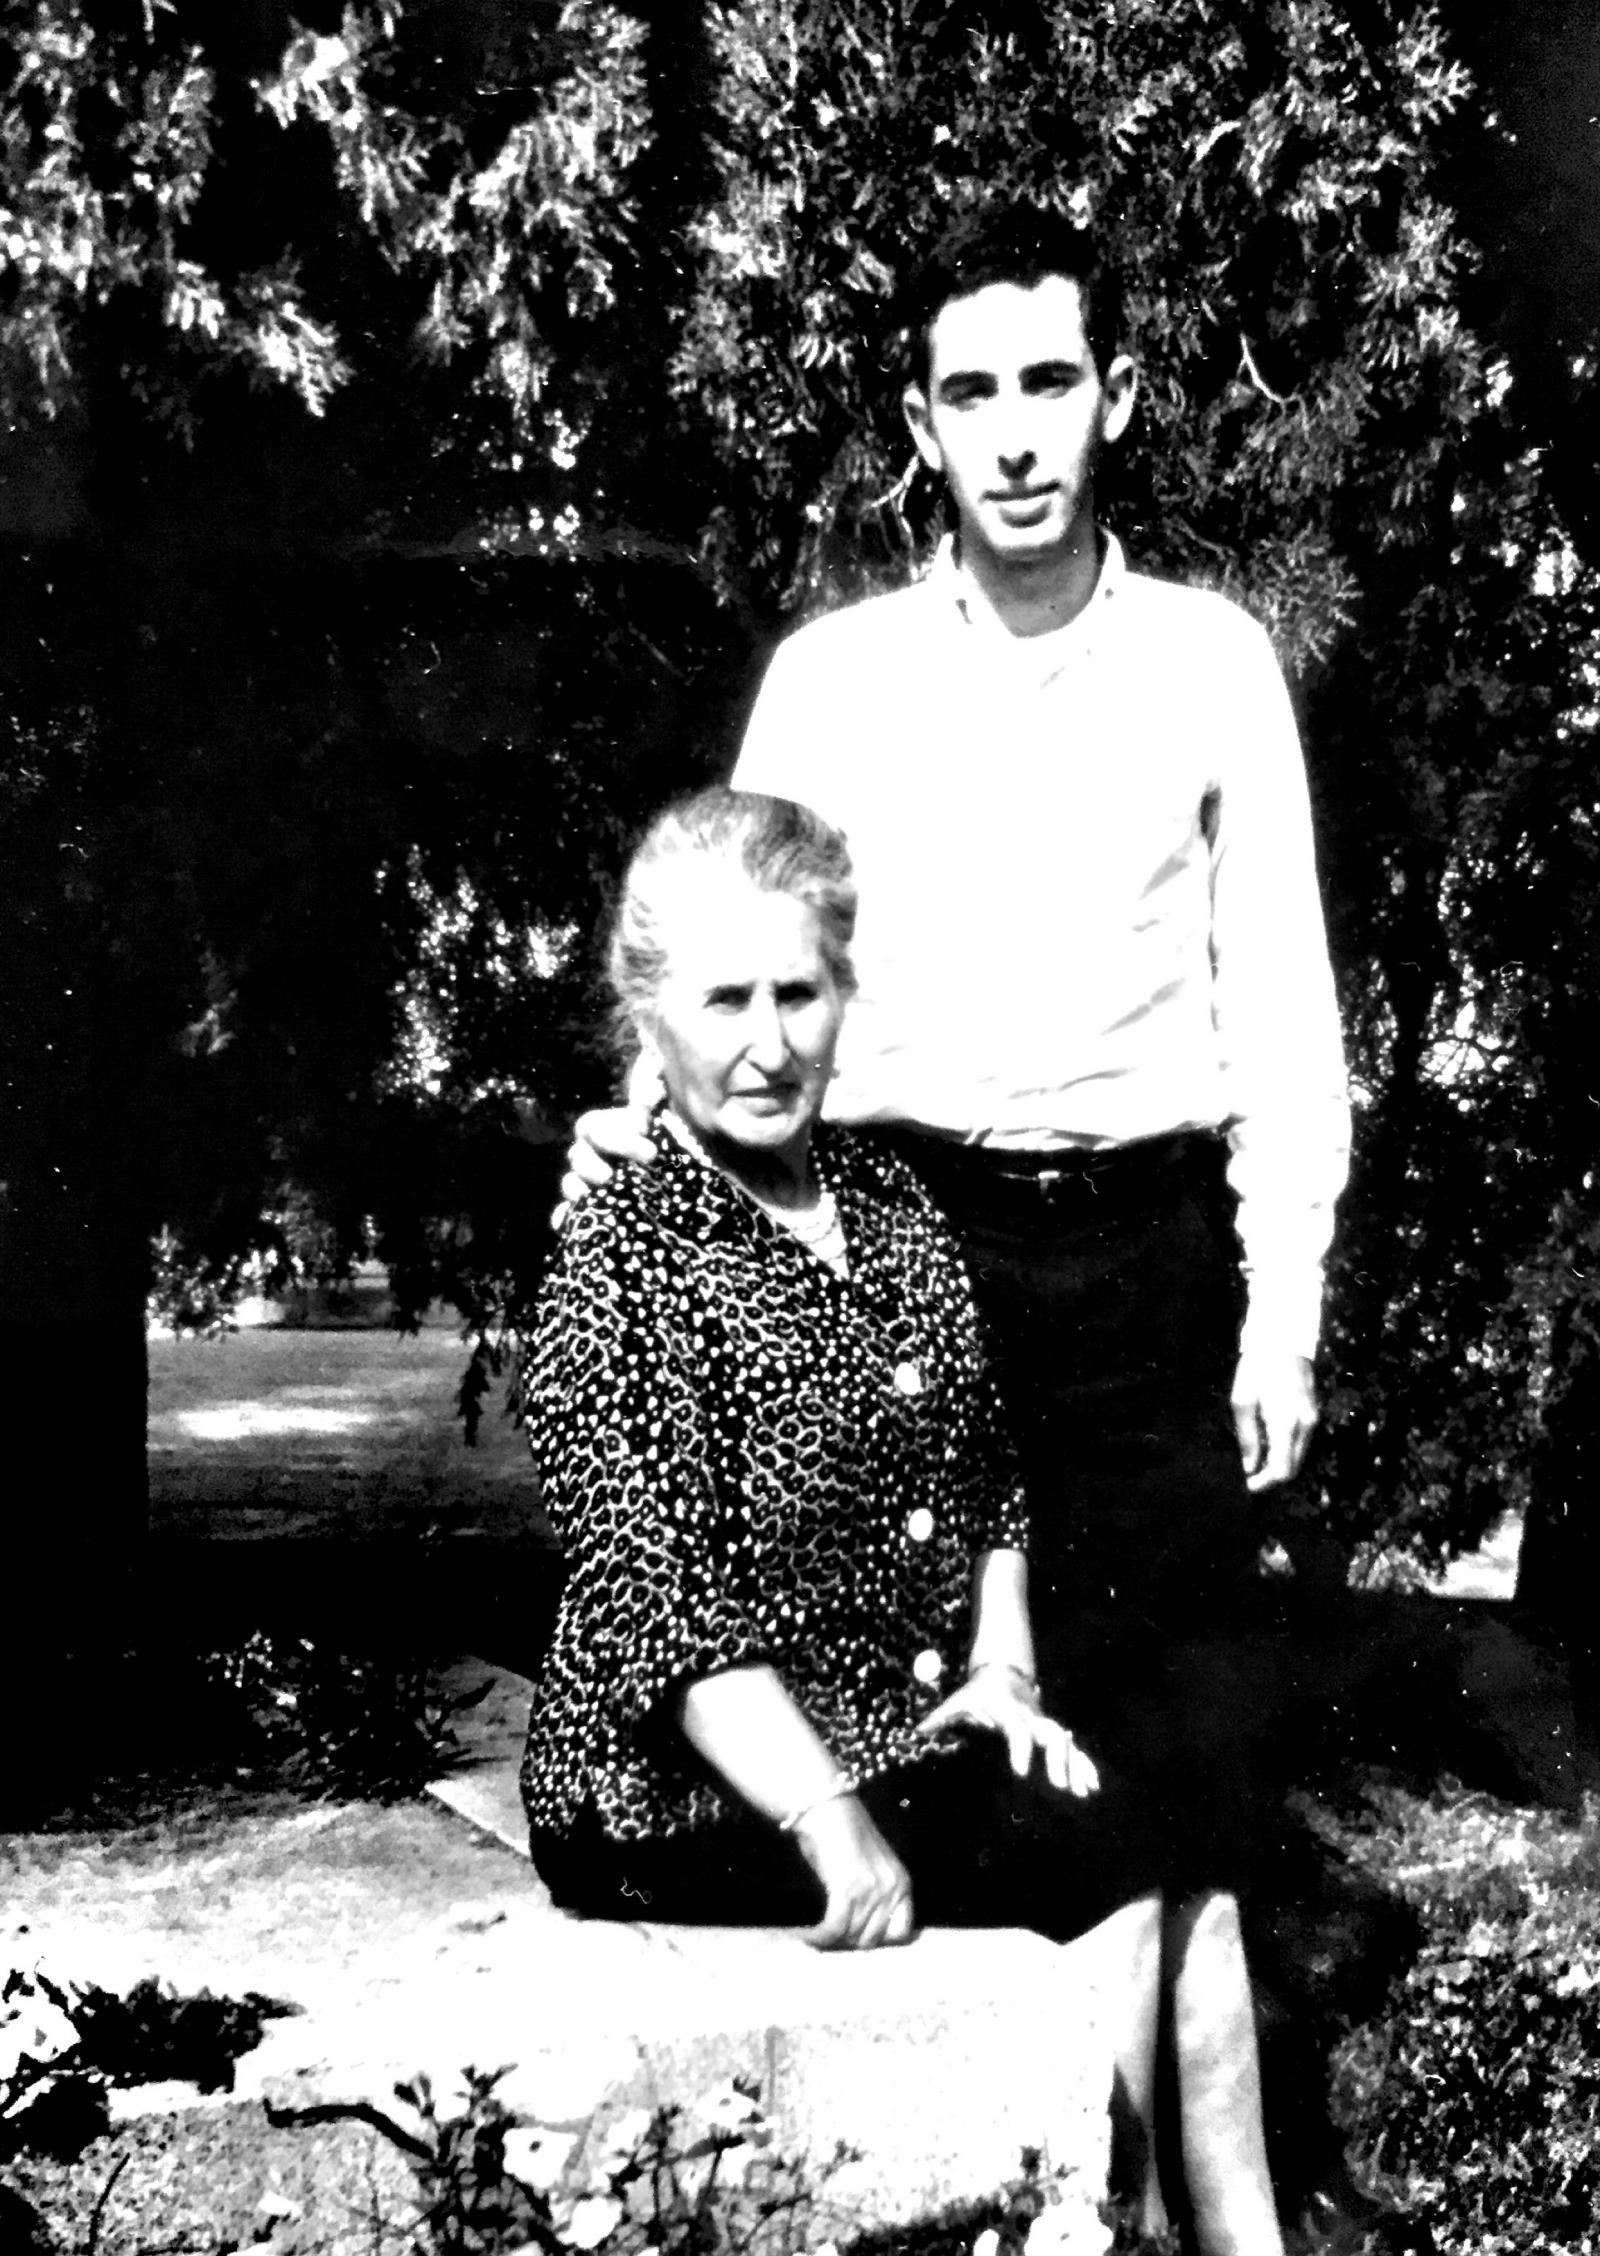 A young man stands next to an older woman, who is seated.